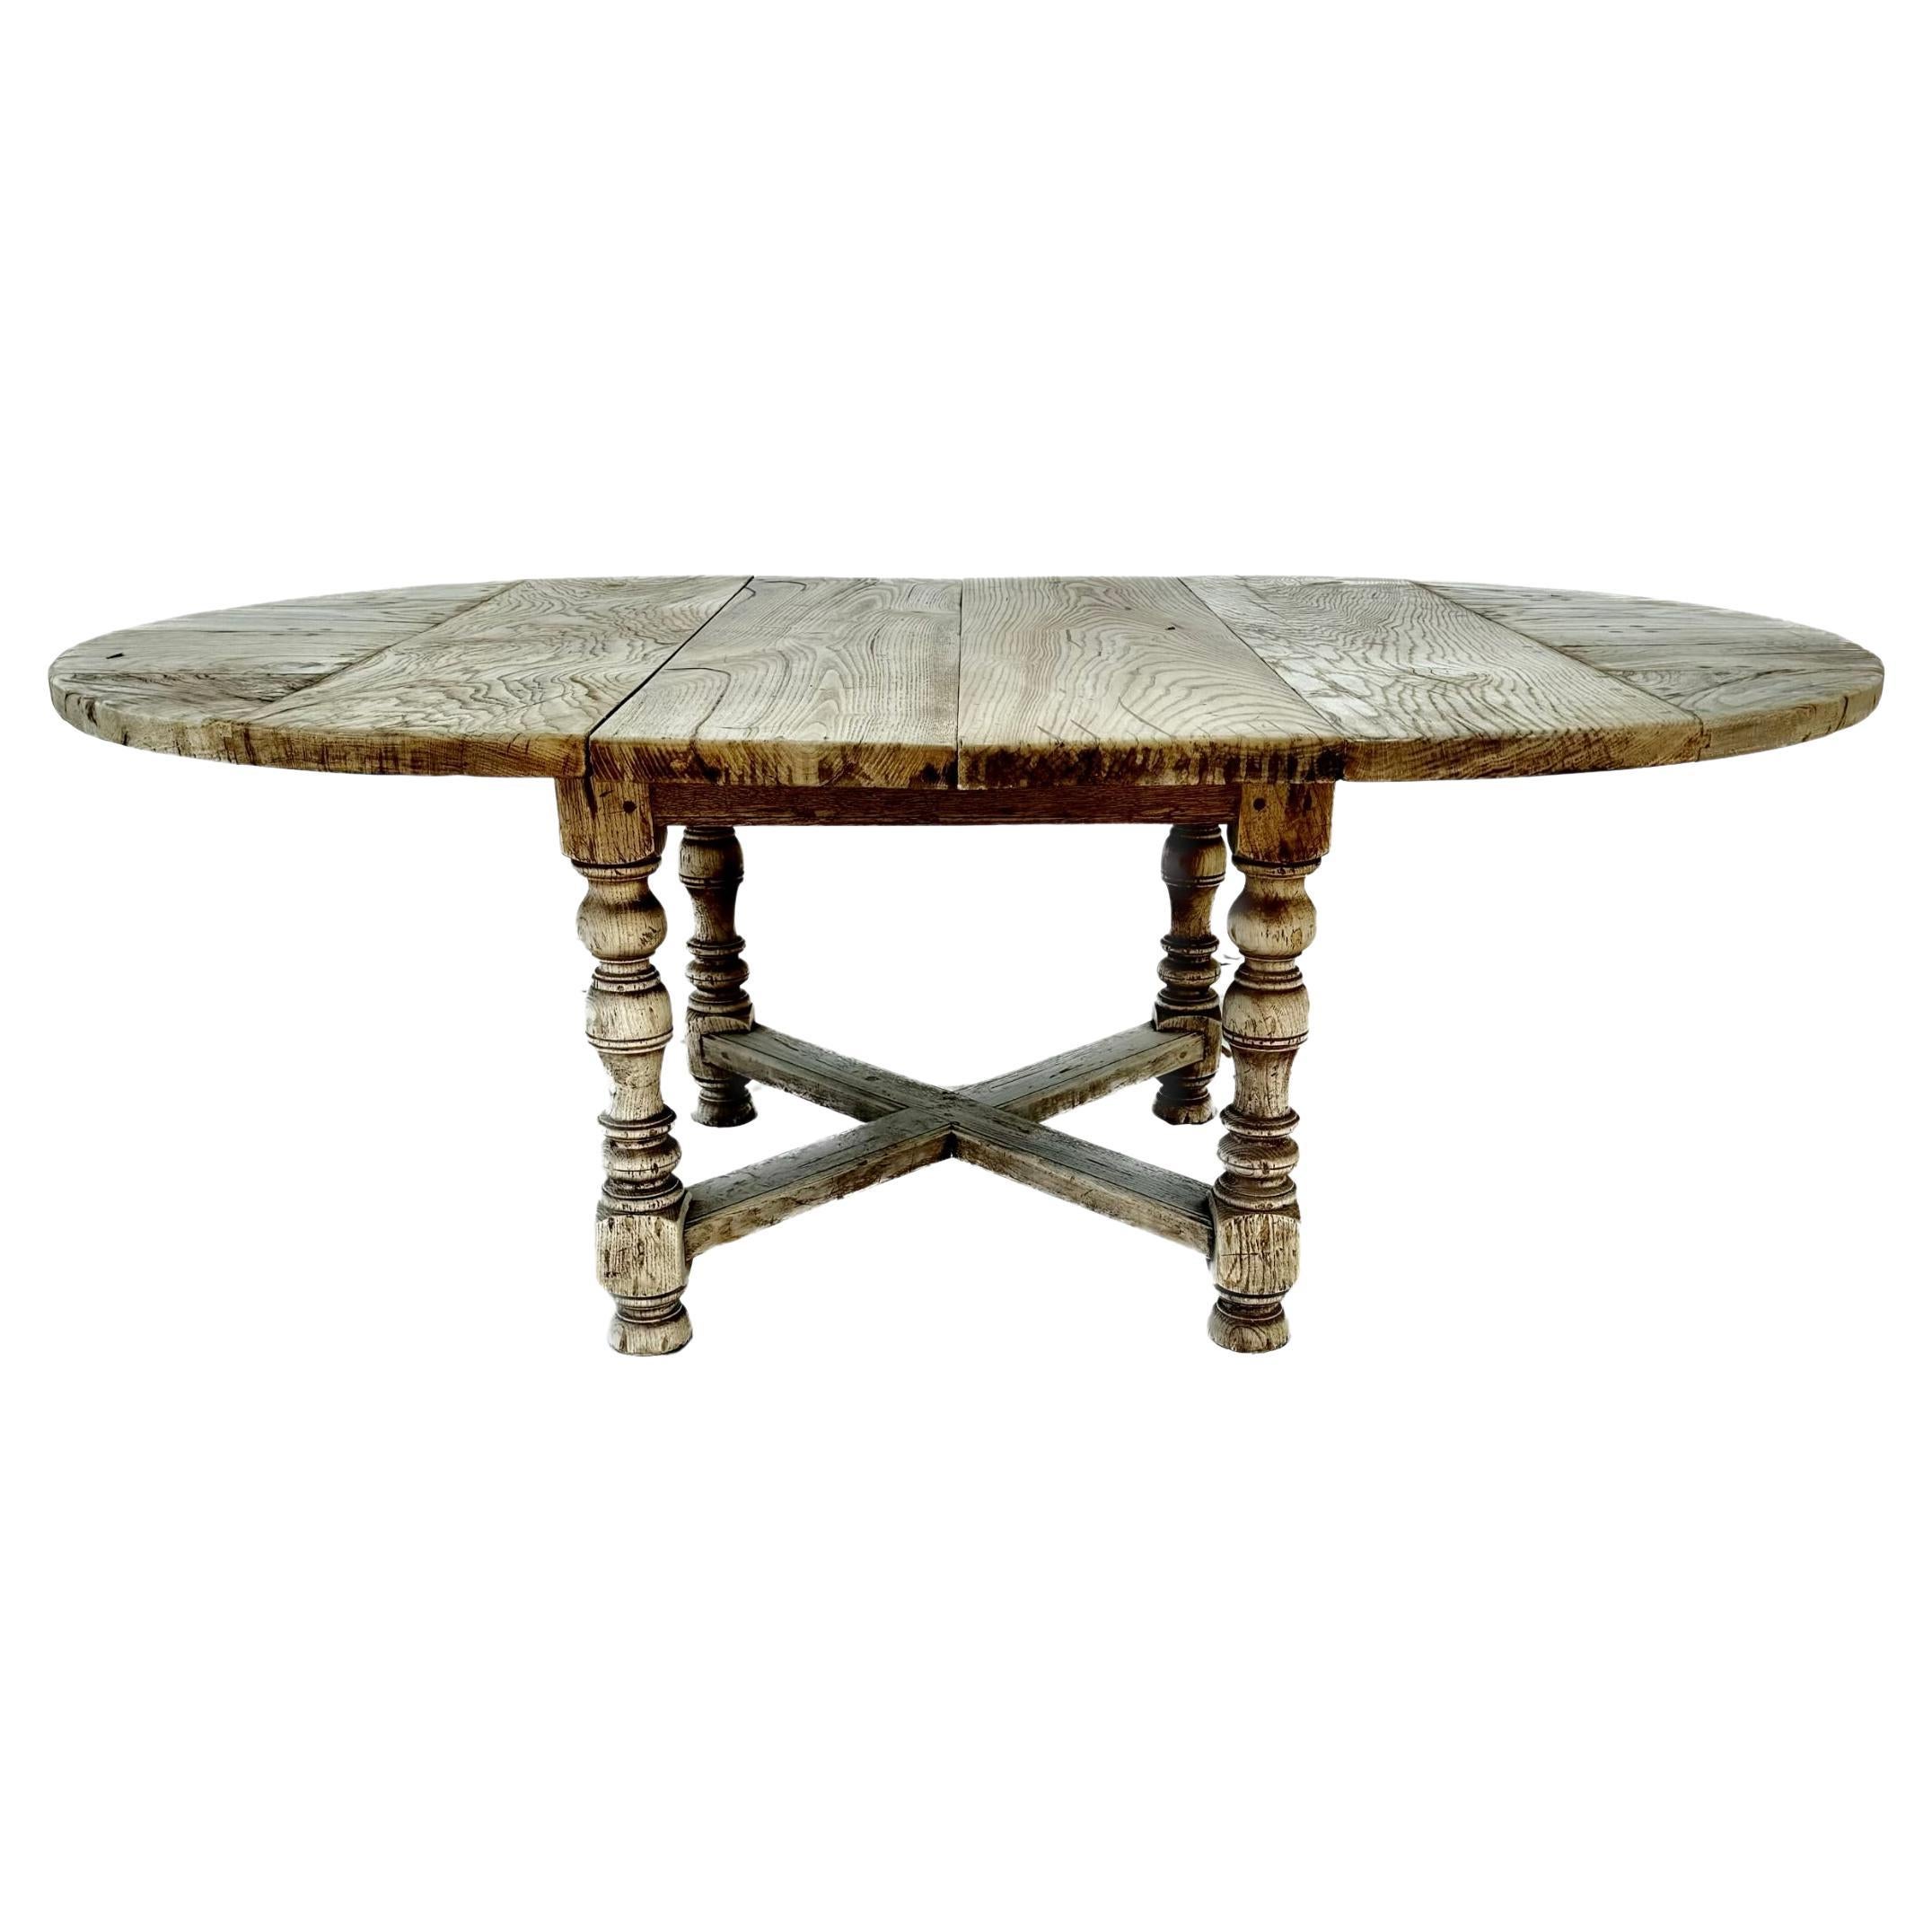 Early 20th century rustic thick bleached oak round dining room table. Table features thick solid bleached wood top with two 12.5 inch leaves (total of 25